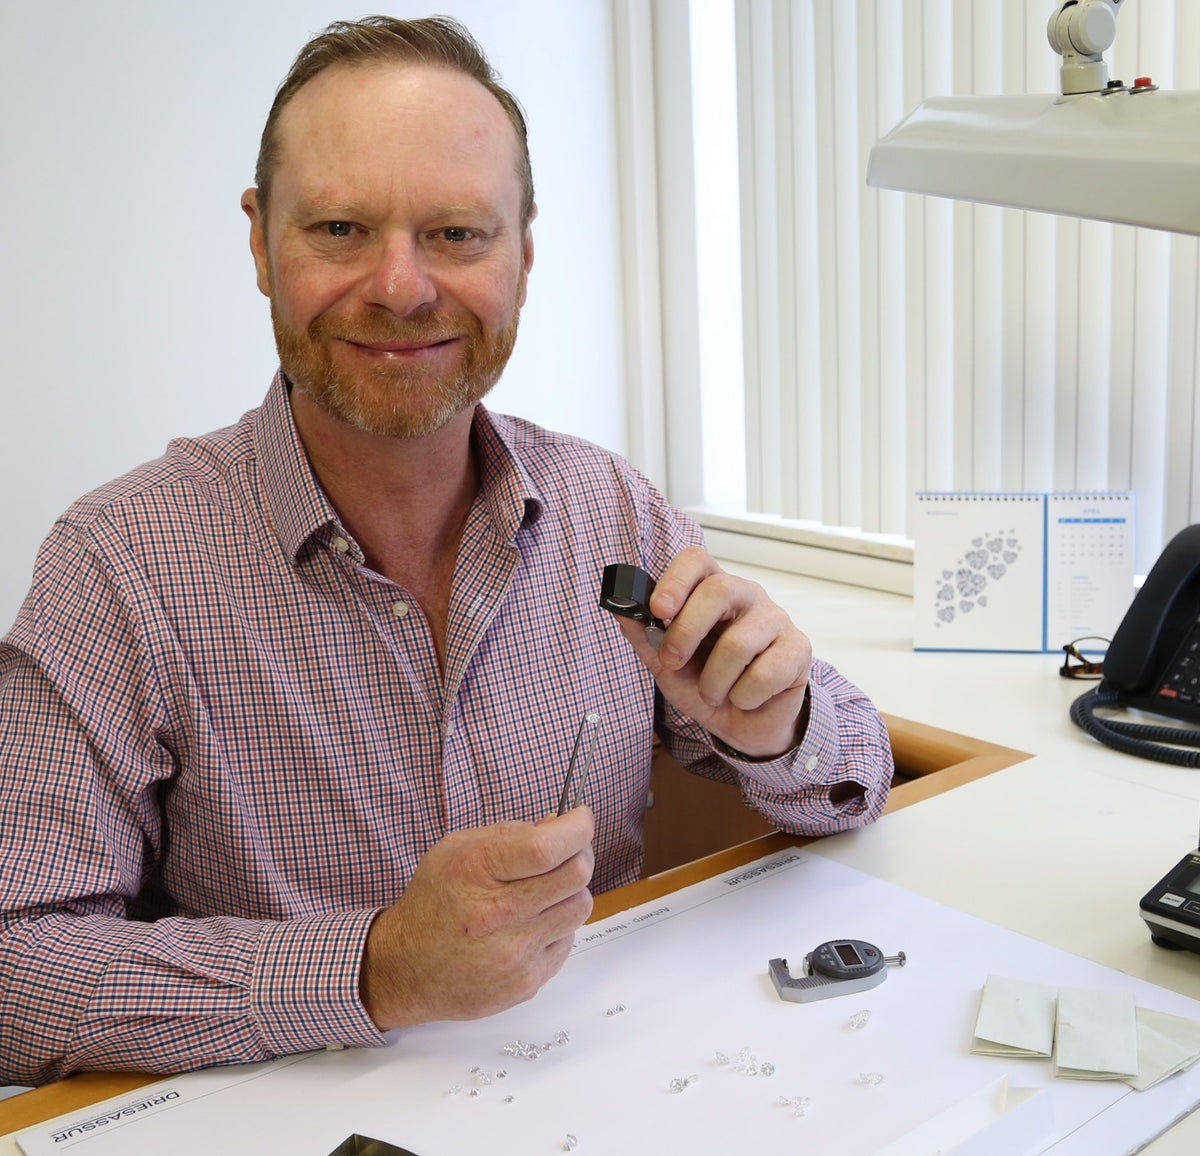 Design Consultation Request for Bespoke Jewellery with Mark Wildman - Founder and Desgining Jeweller